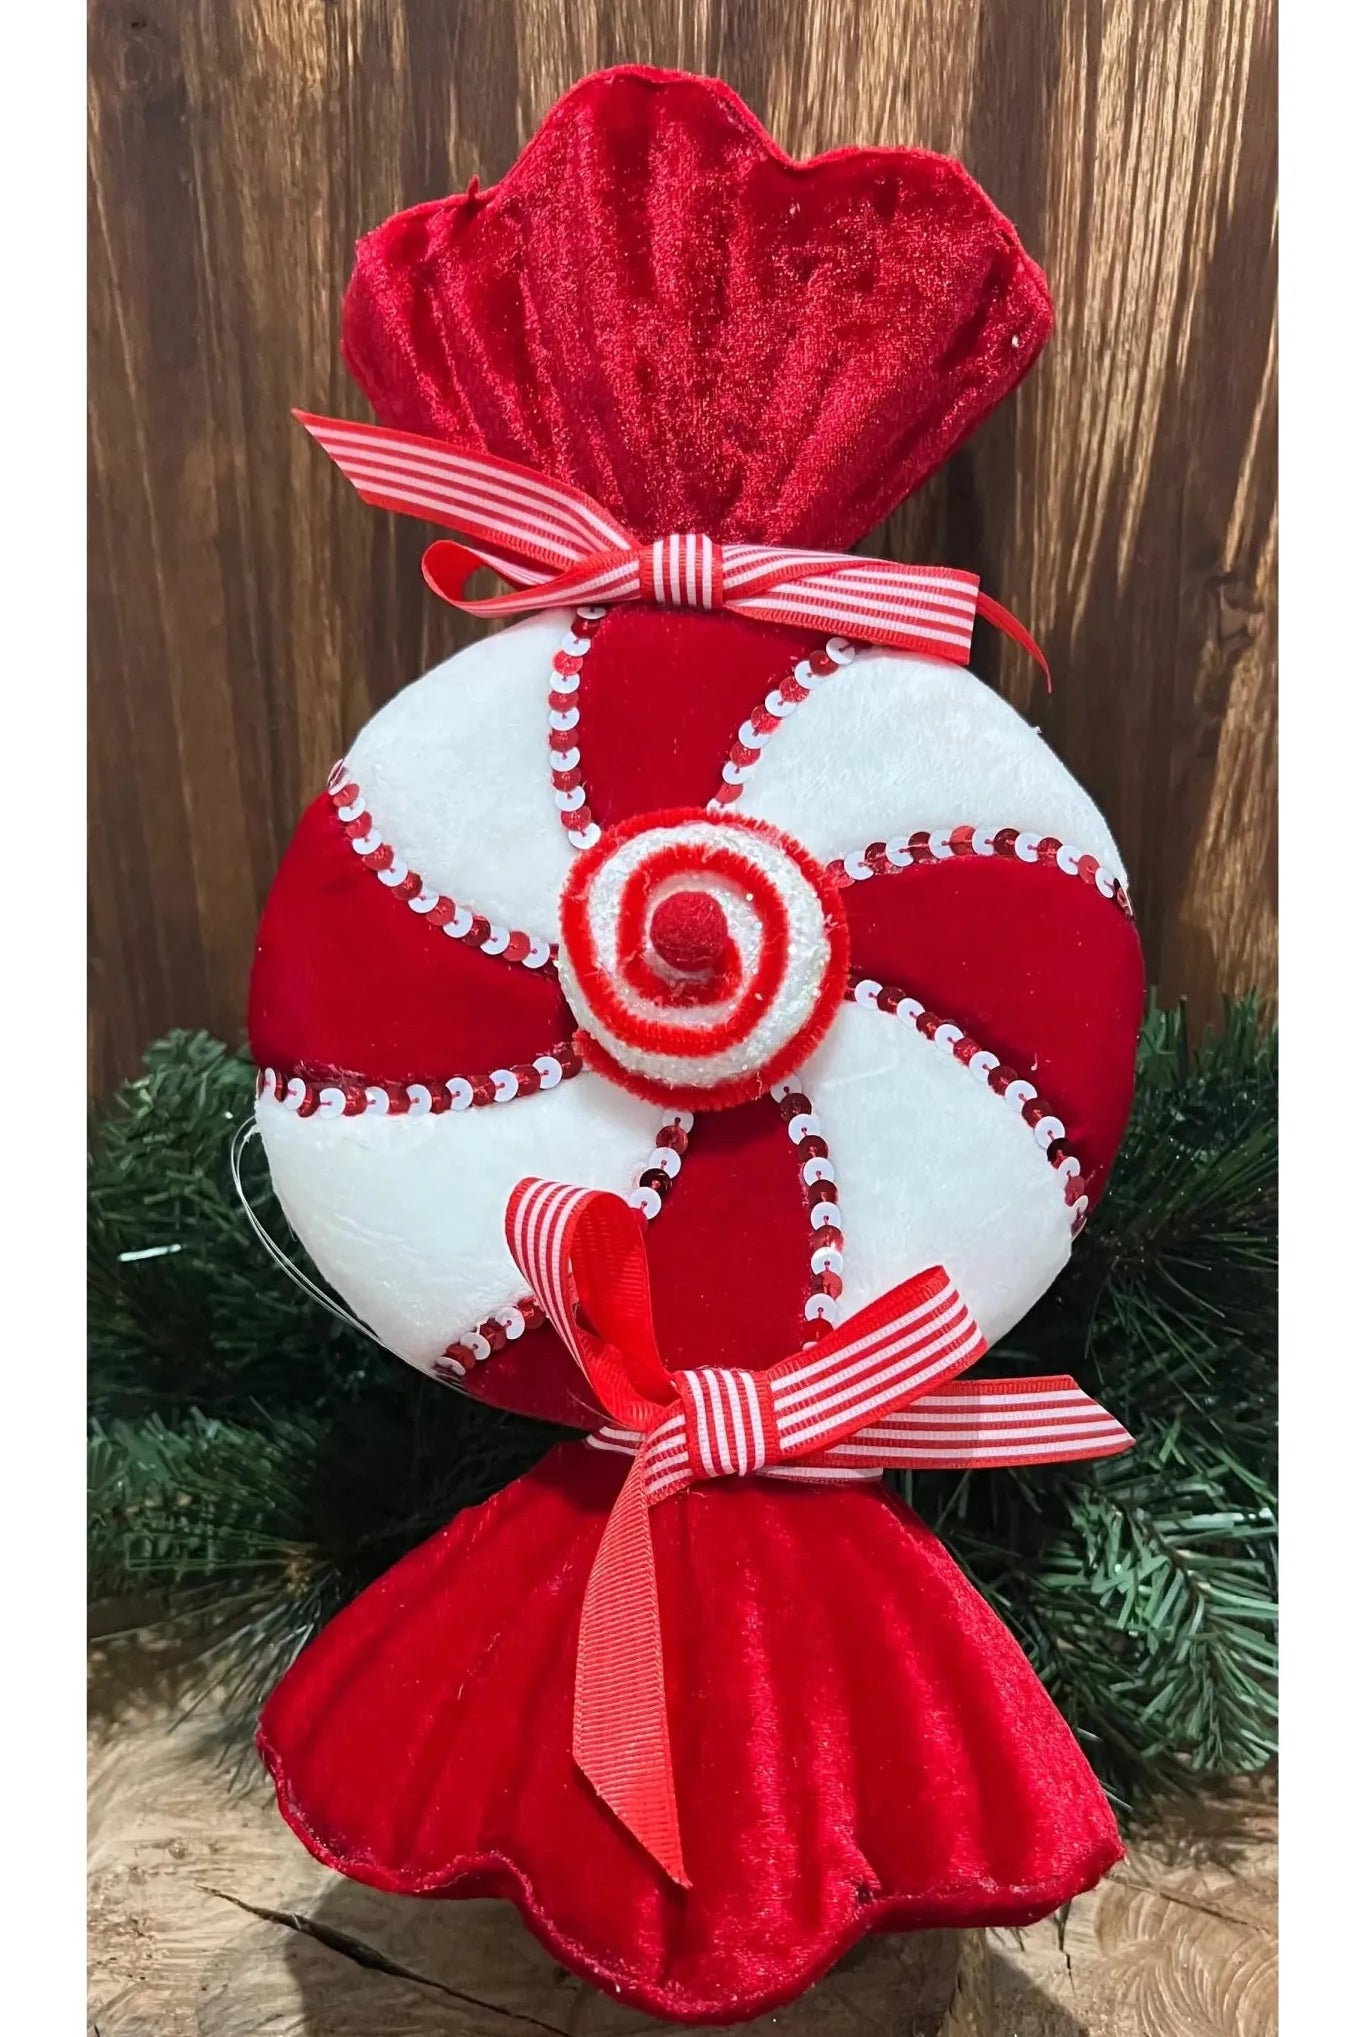 Shop For 14" Fabric Peppermint Candy Ornament: Red & White MTX69438RDWH